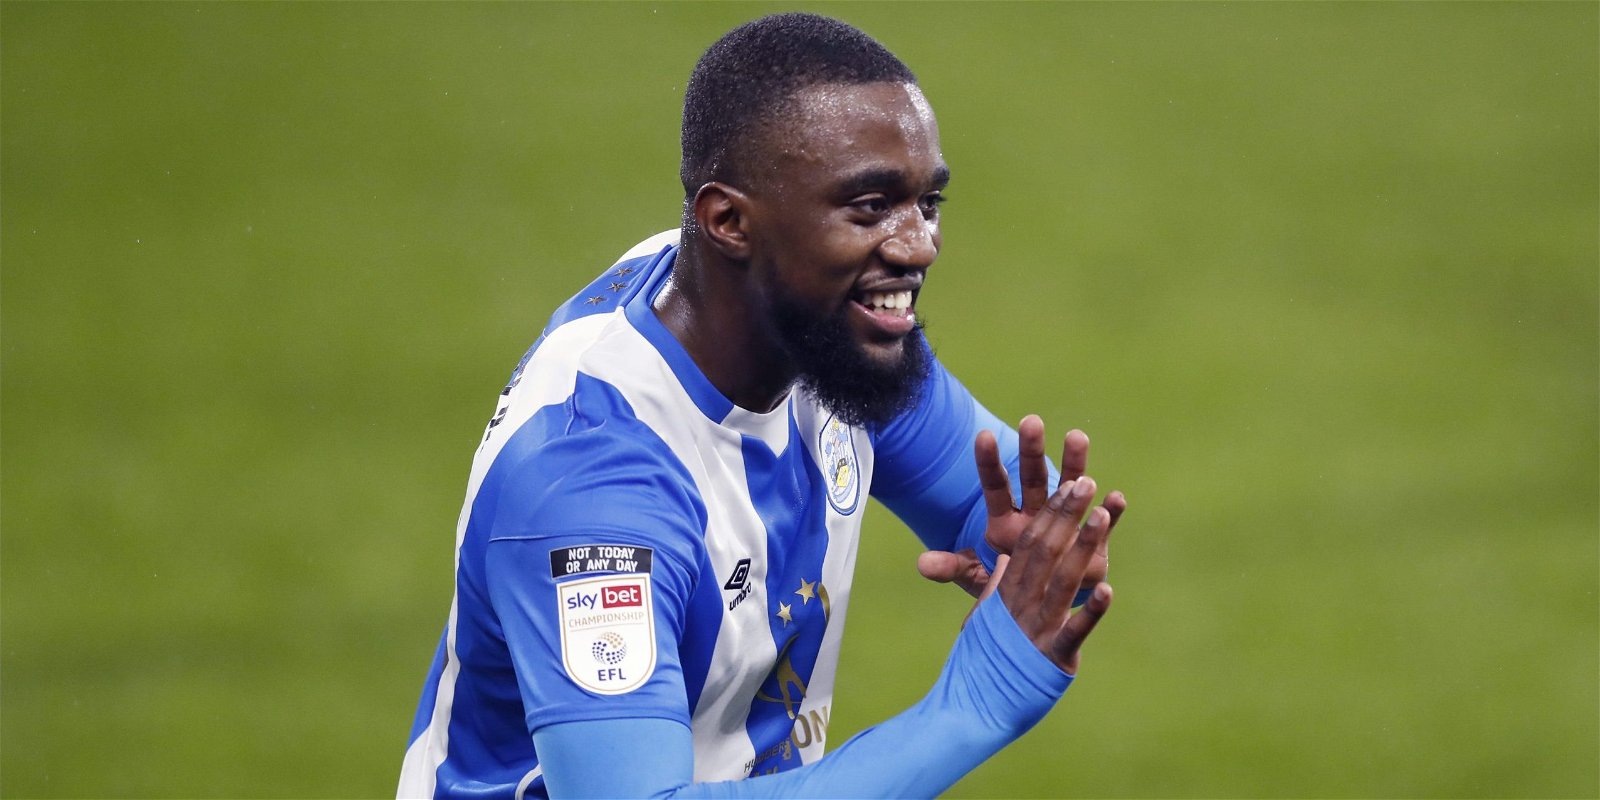 , 3 things we learned about Huddersfield Town after Sheffield Wednesday win